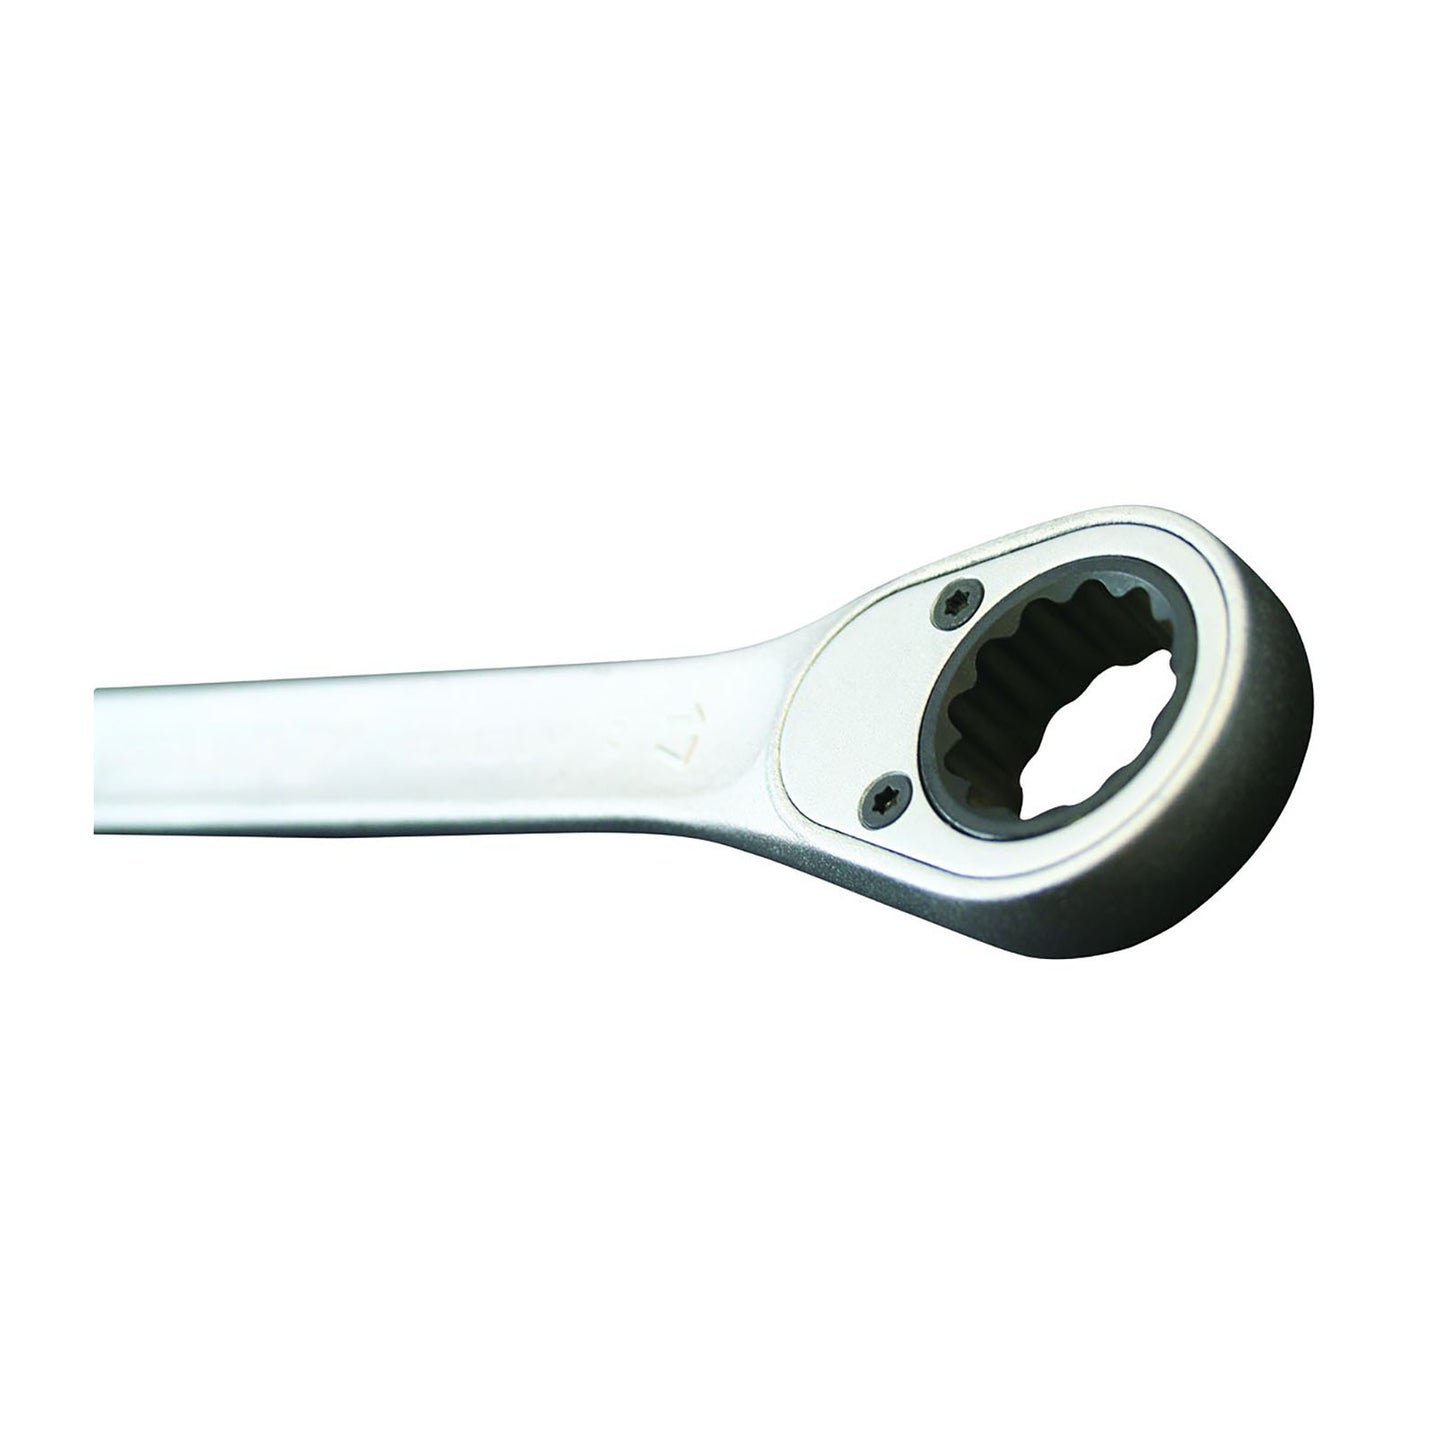 GEDORE 7 R 34 - Ratchet combination wrench, 34mm (2219549)